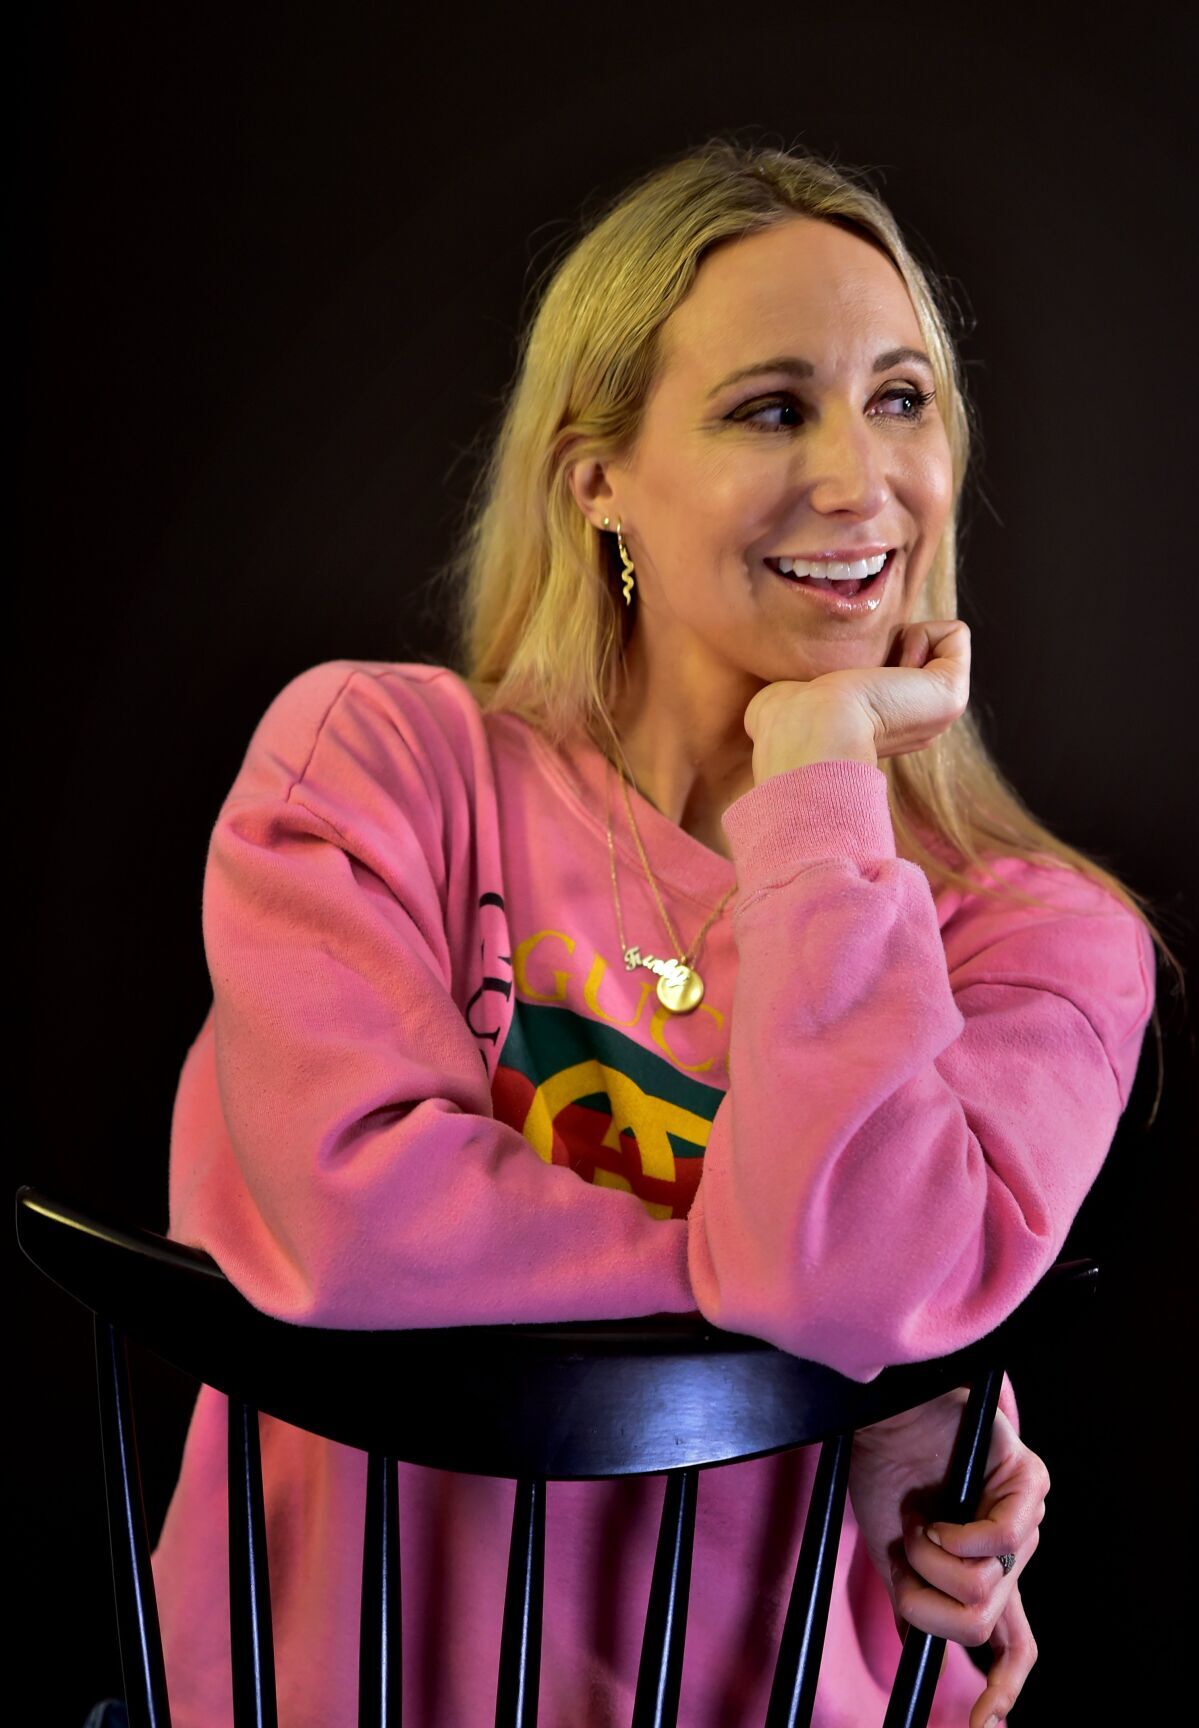 St. Louisan Nikki Glaser learns you can go home again in new E! reality  series